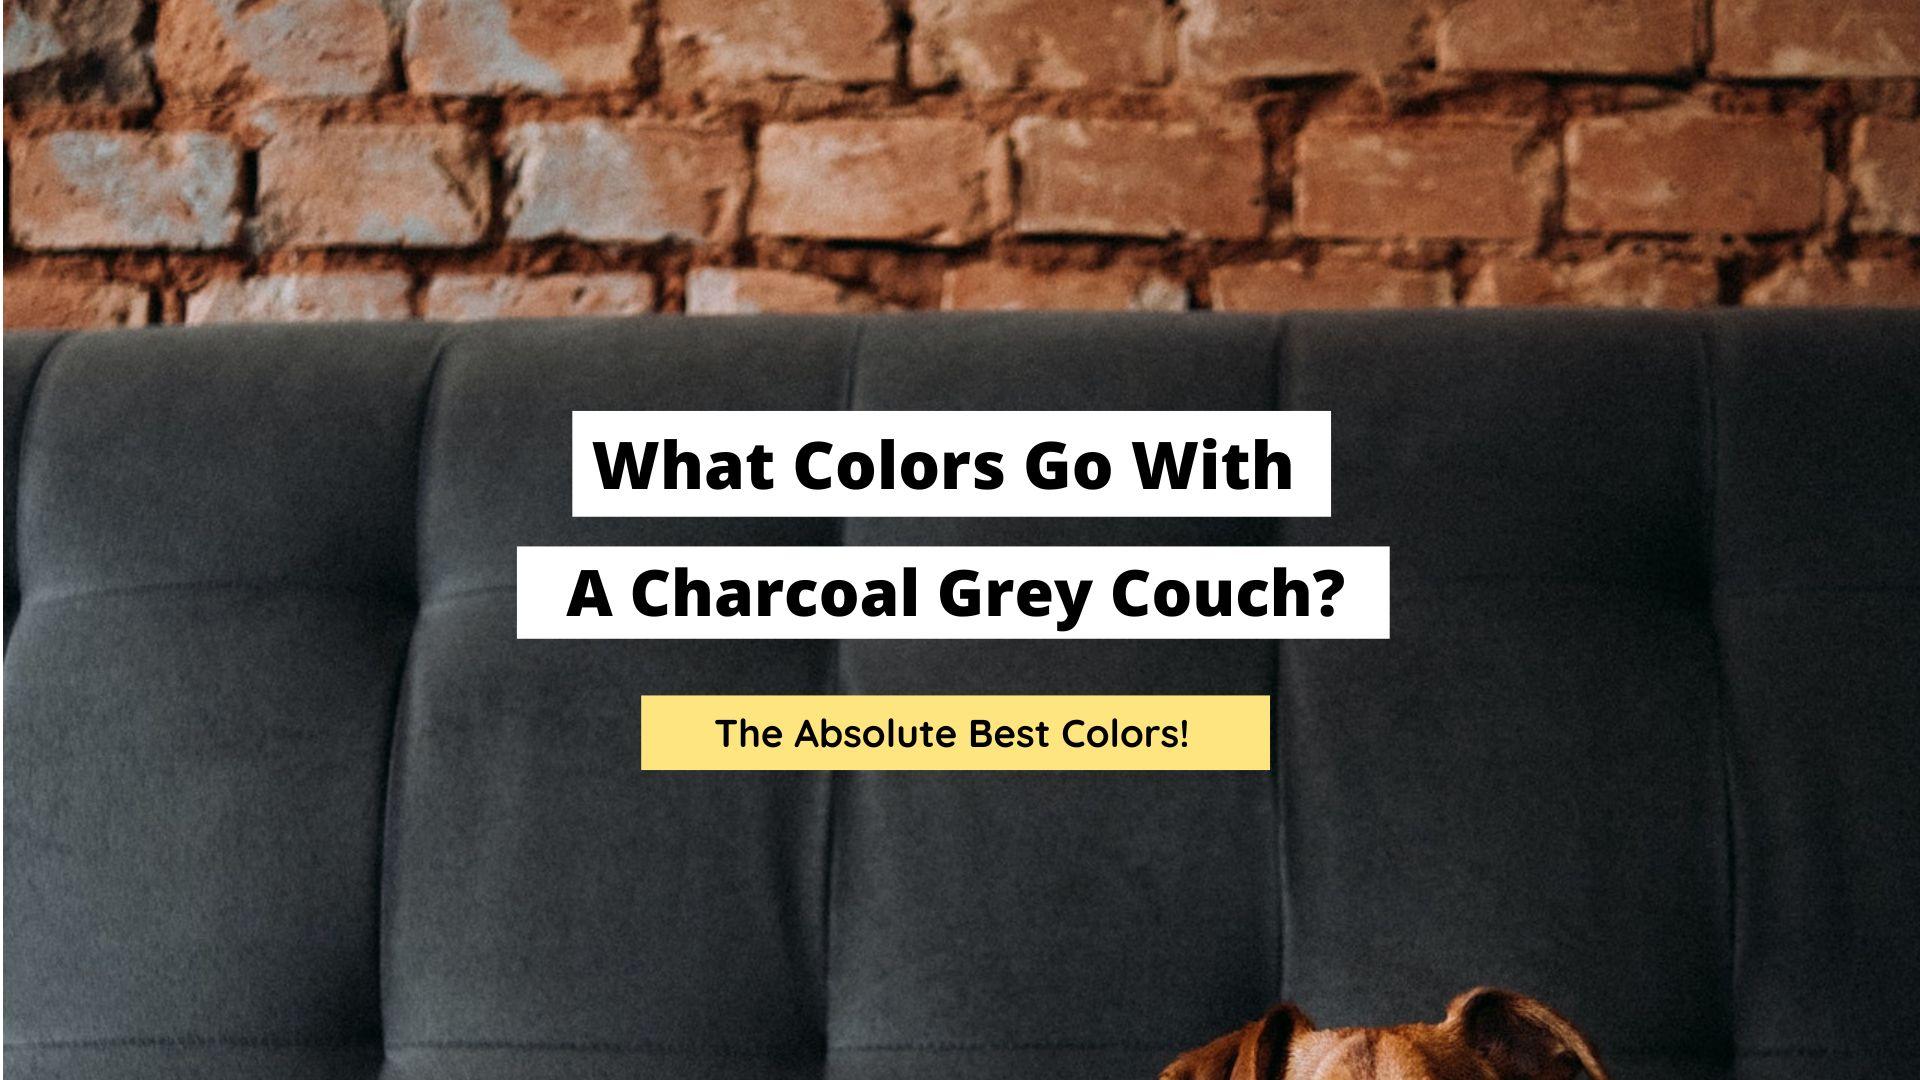 What Colors Go With A Charcoal Grey Couch